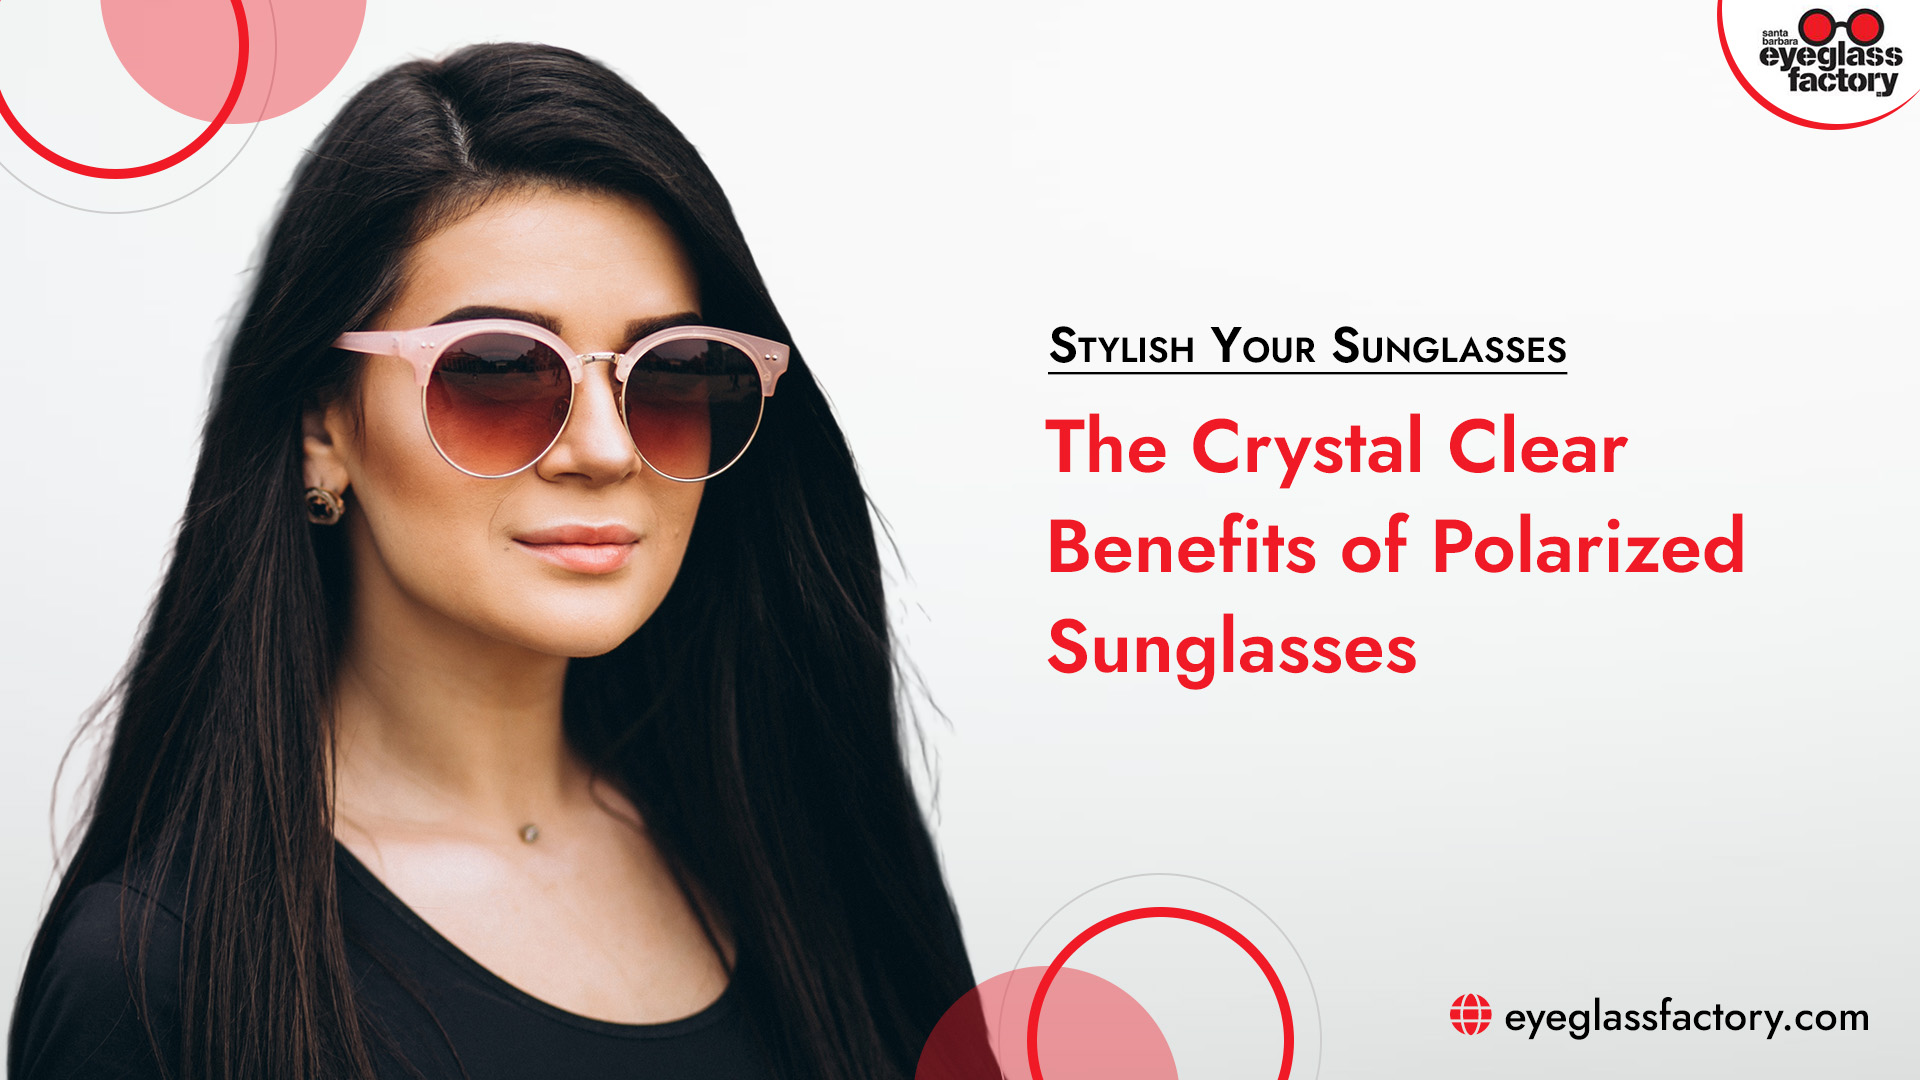 The Crystal Clear Benefits of Polarized Sunglasses